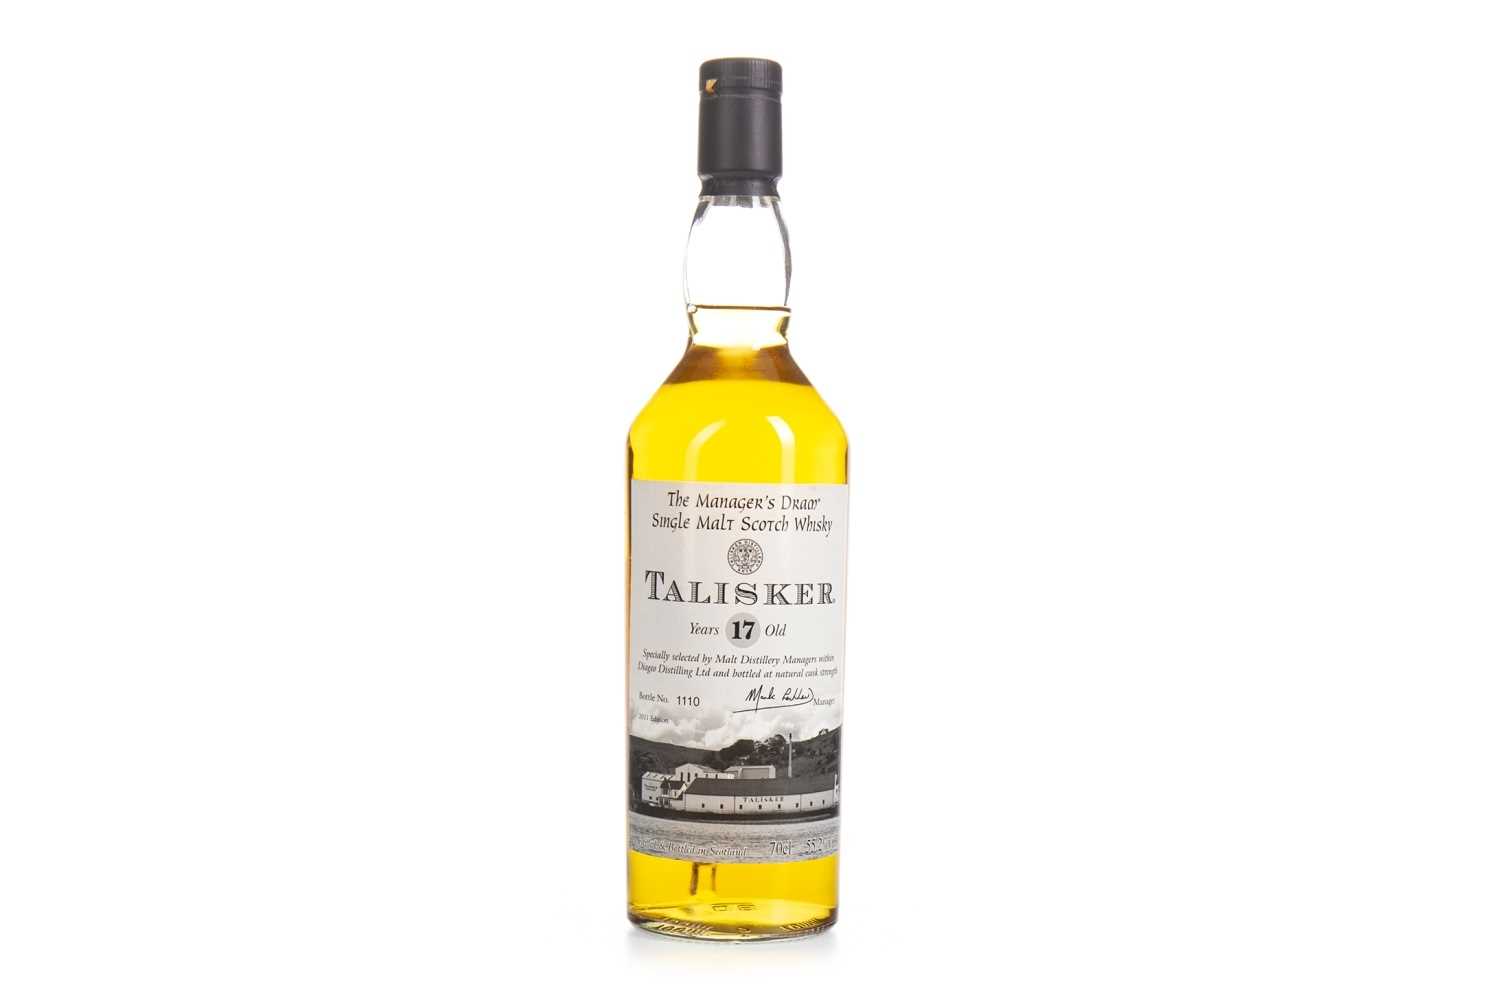 Lot 252 - TALISKER THE MANAGER'S DRAM AGED 17 YEARS